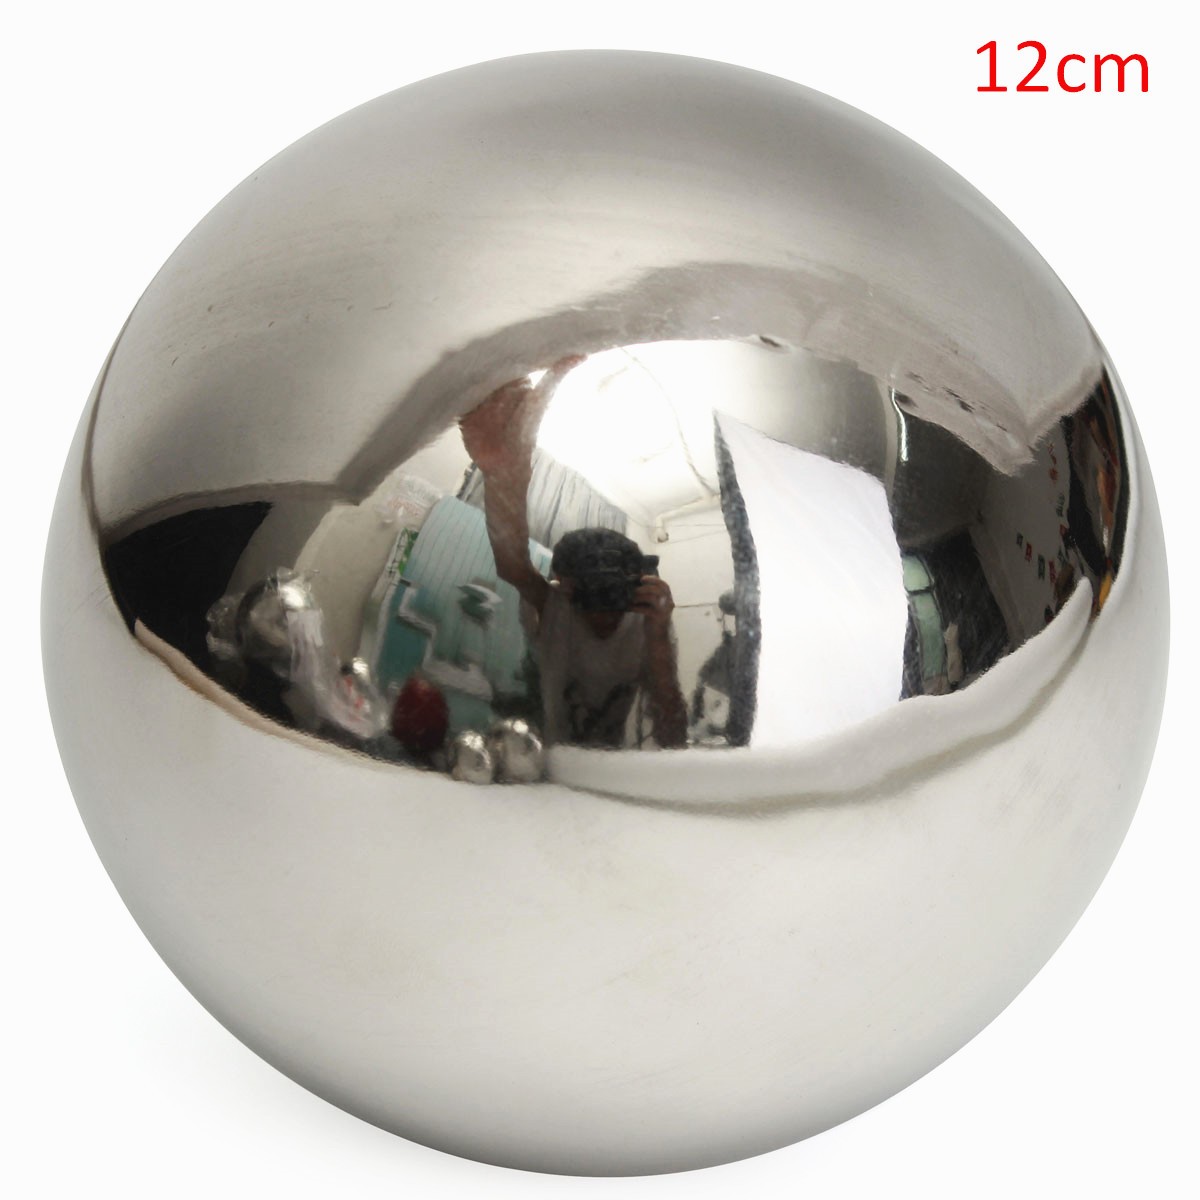 Stainless-Steel-Mirror-Ball-Polished-Hollow-Ball-Hardware-Accessories-58101215cm-1050679